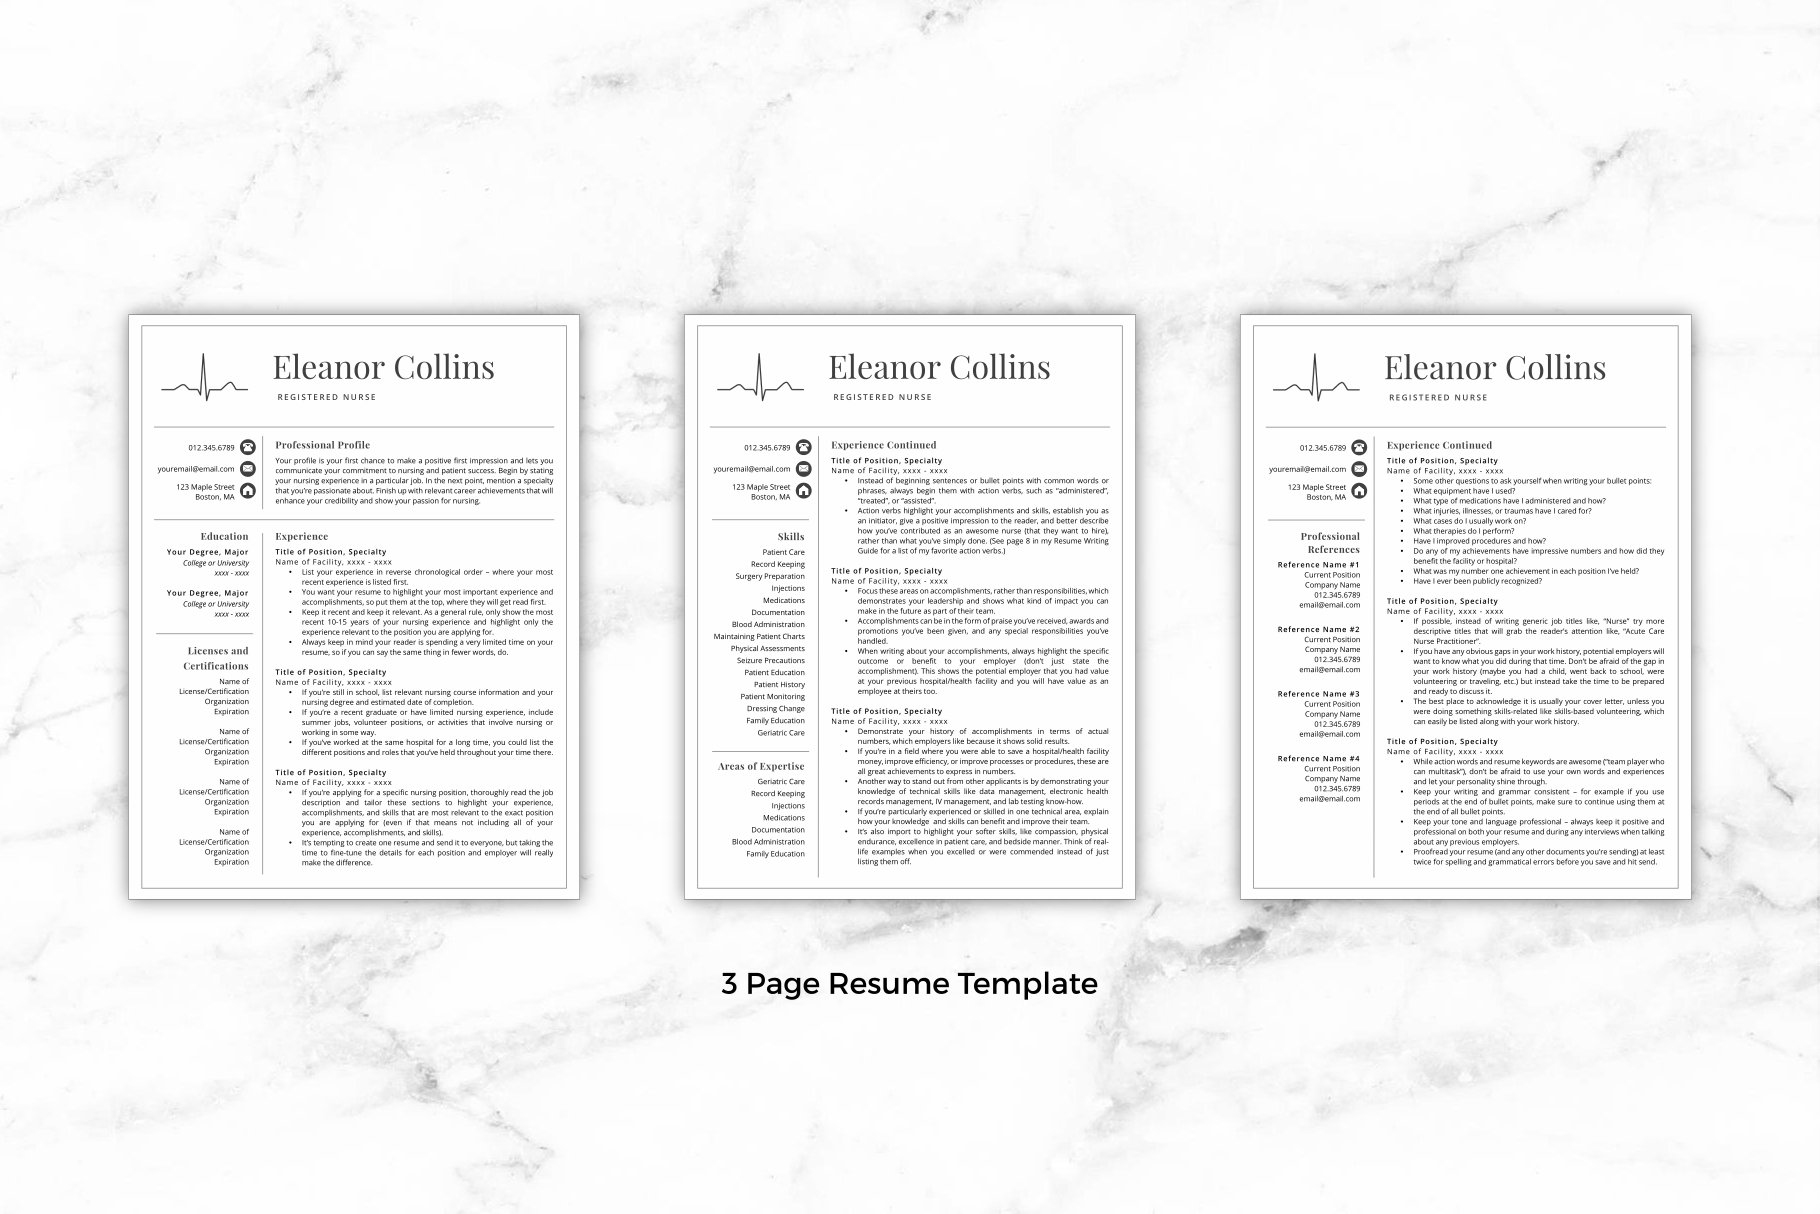 Three resume templates on a marble background.